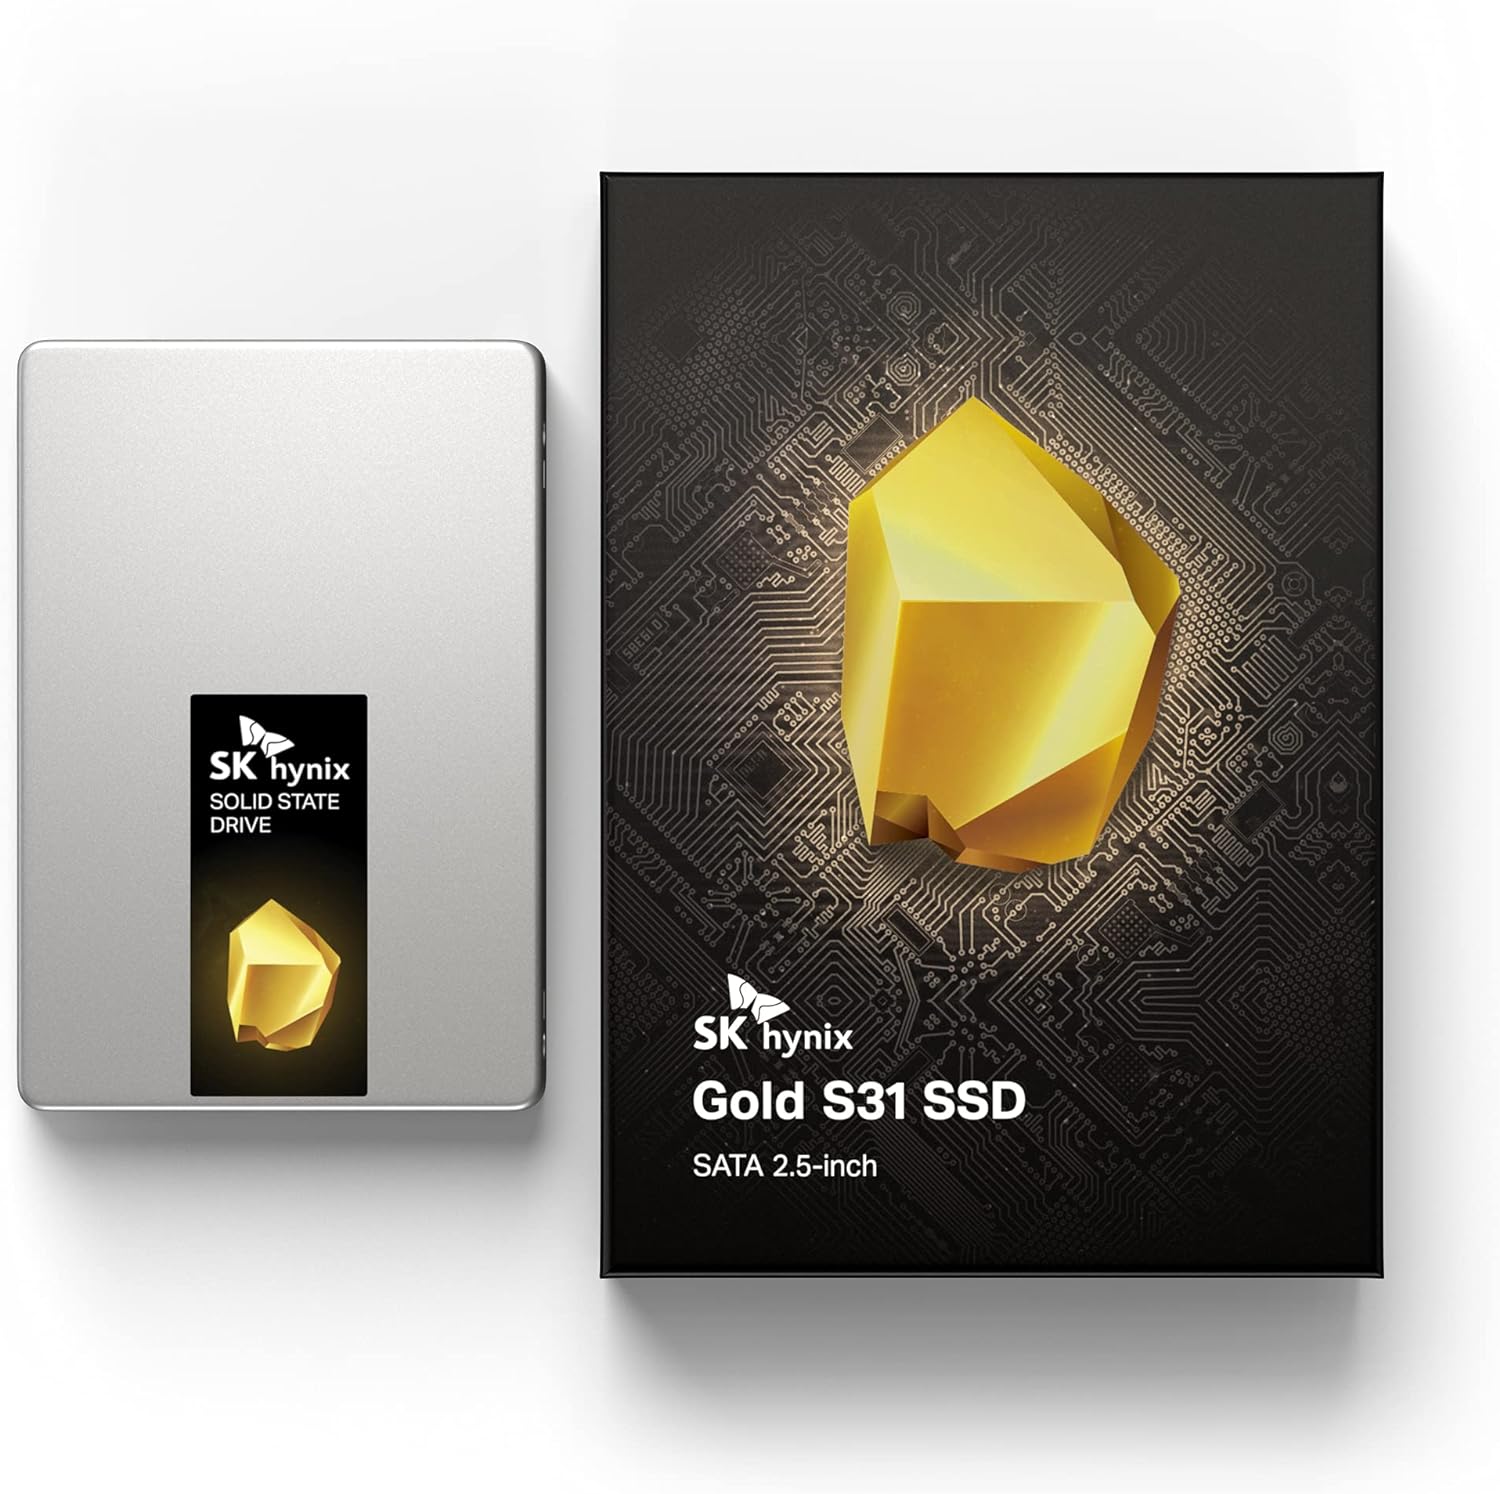 SK hynix Gold S31 1TB SATA Gen3 2.5 inch Internal SSD | SSD 1TB | Up to 560MB/S | Solid State Drive | Compact 2.5 SSD Form Factor SSD | Internal Solid State Drive | SATA SSD